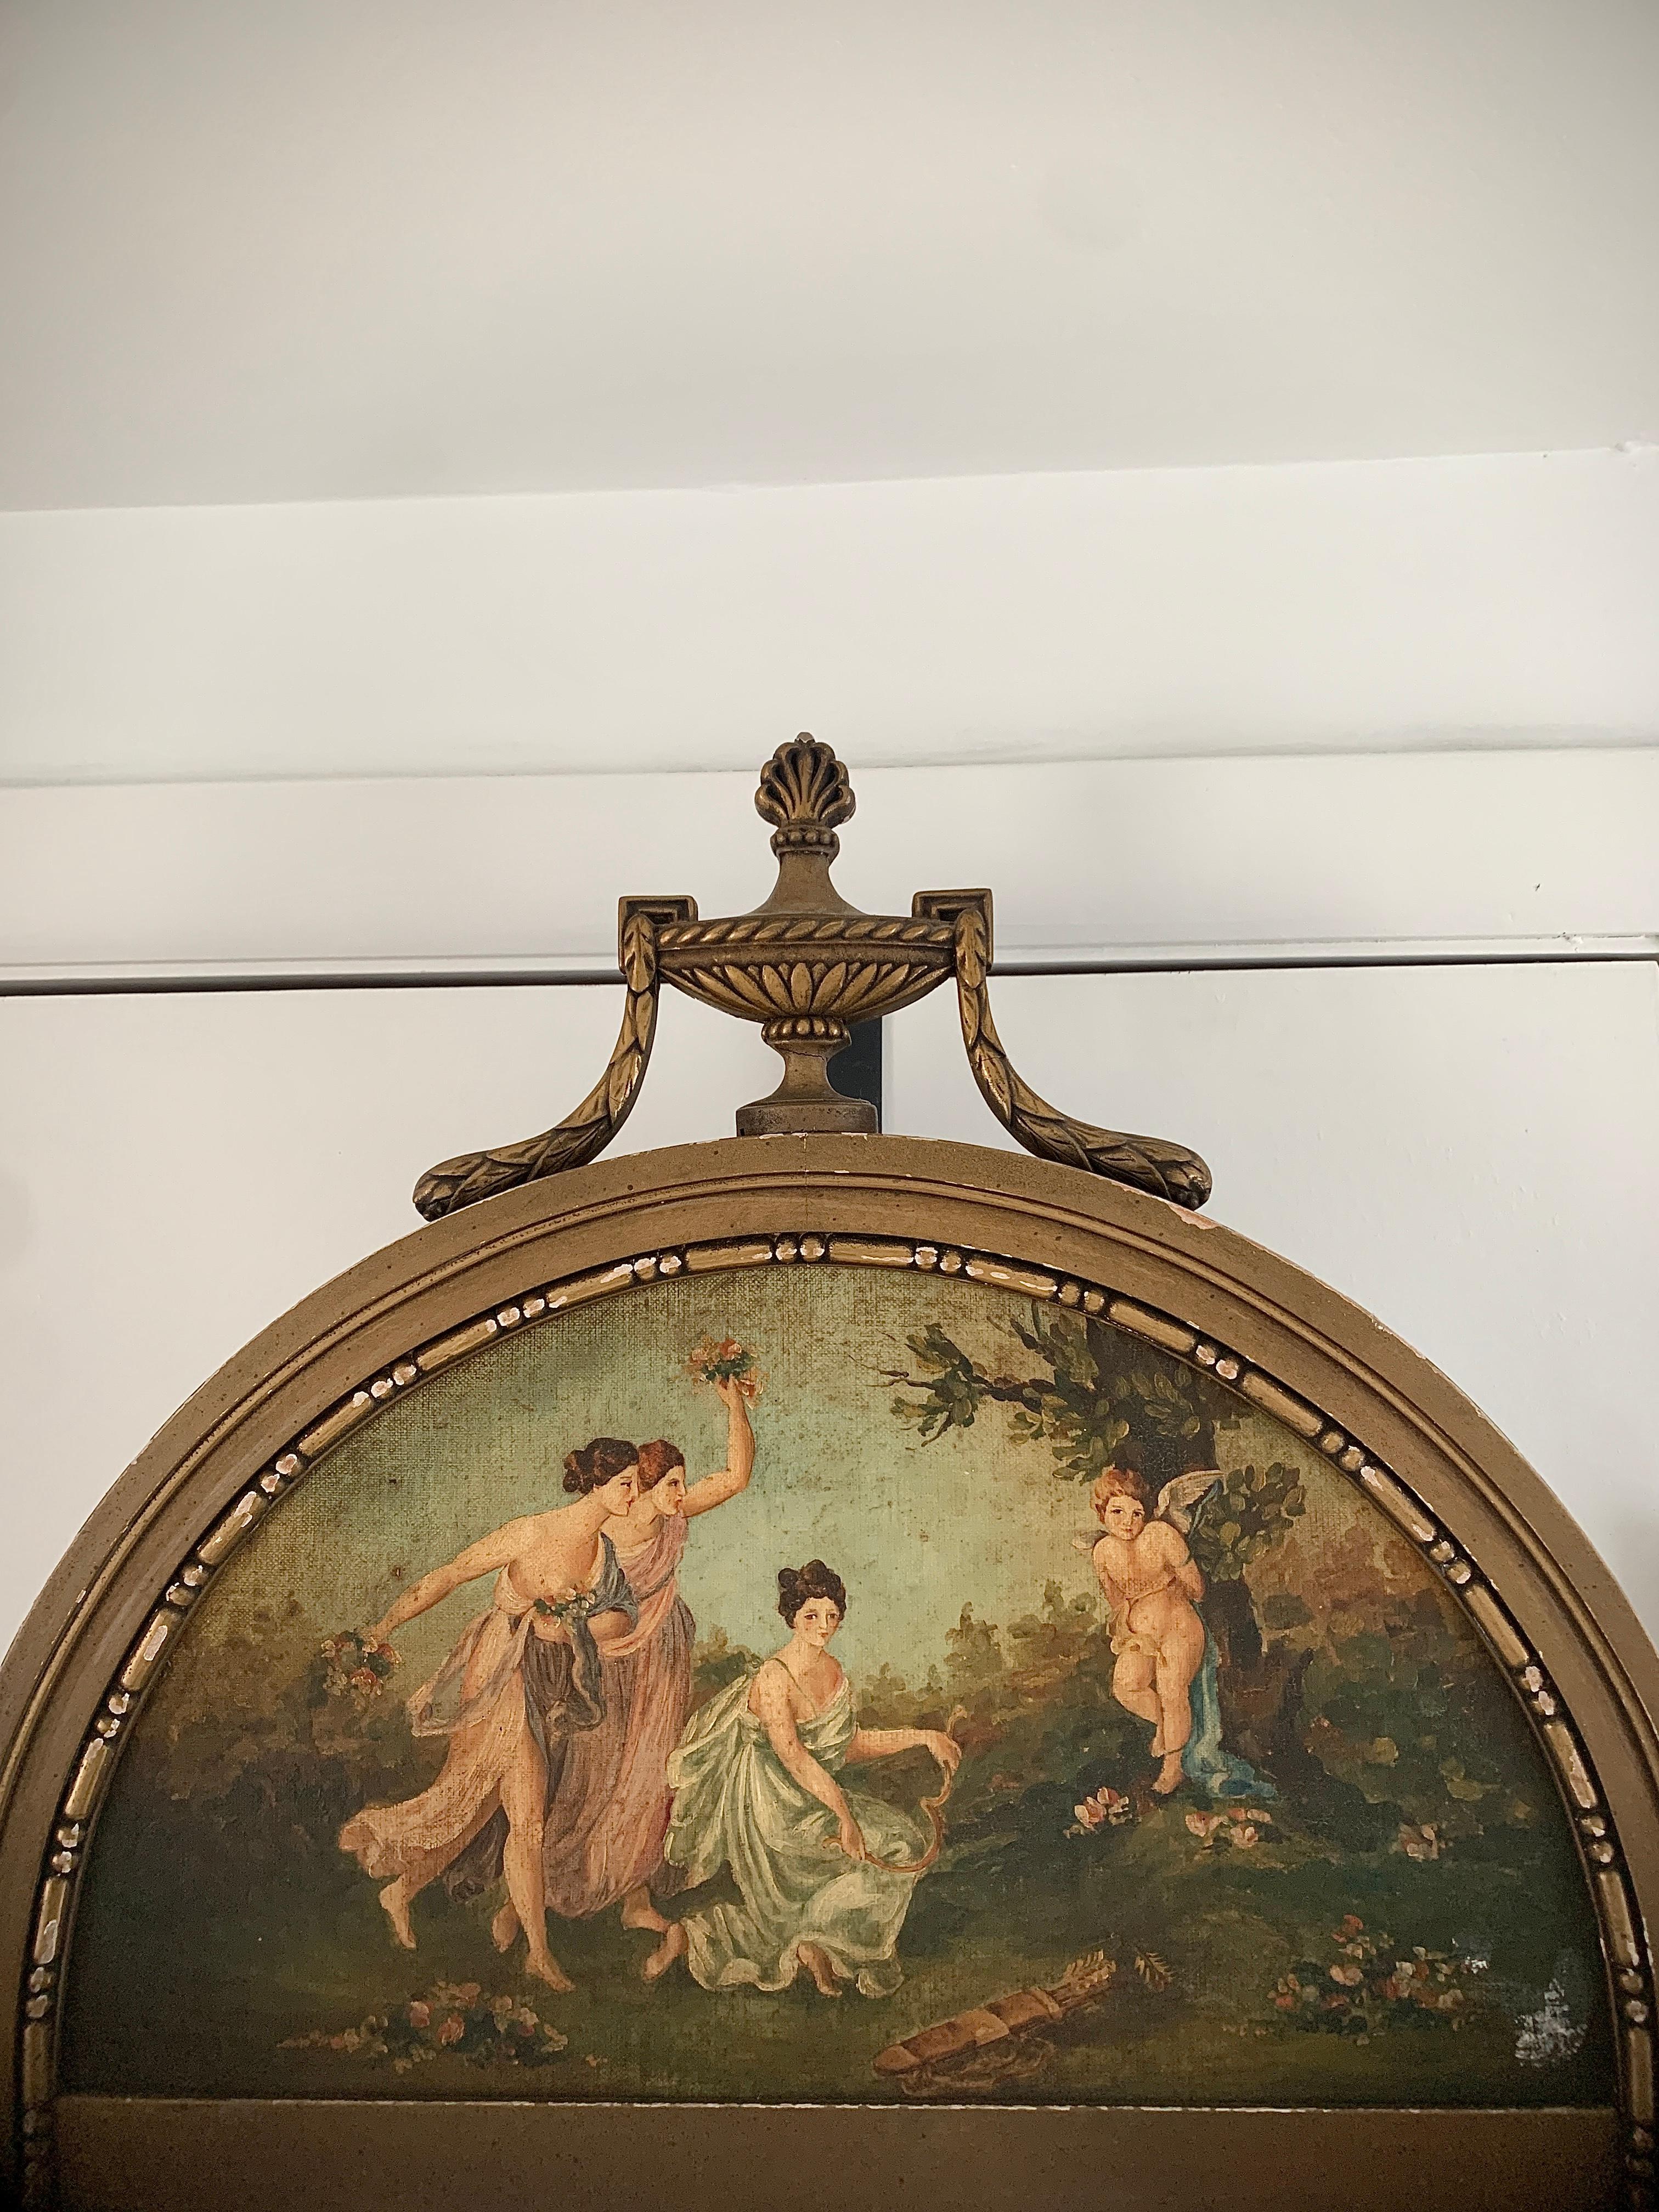 A gorgeous neoclassical French Provincial style Trumeau mirror.

Circa 1920s

Giltwood frame, with painted scene of ladies & putti, and original mirror glass.

Measures: 21